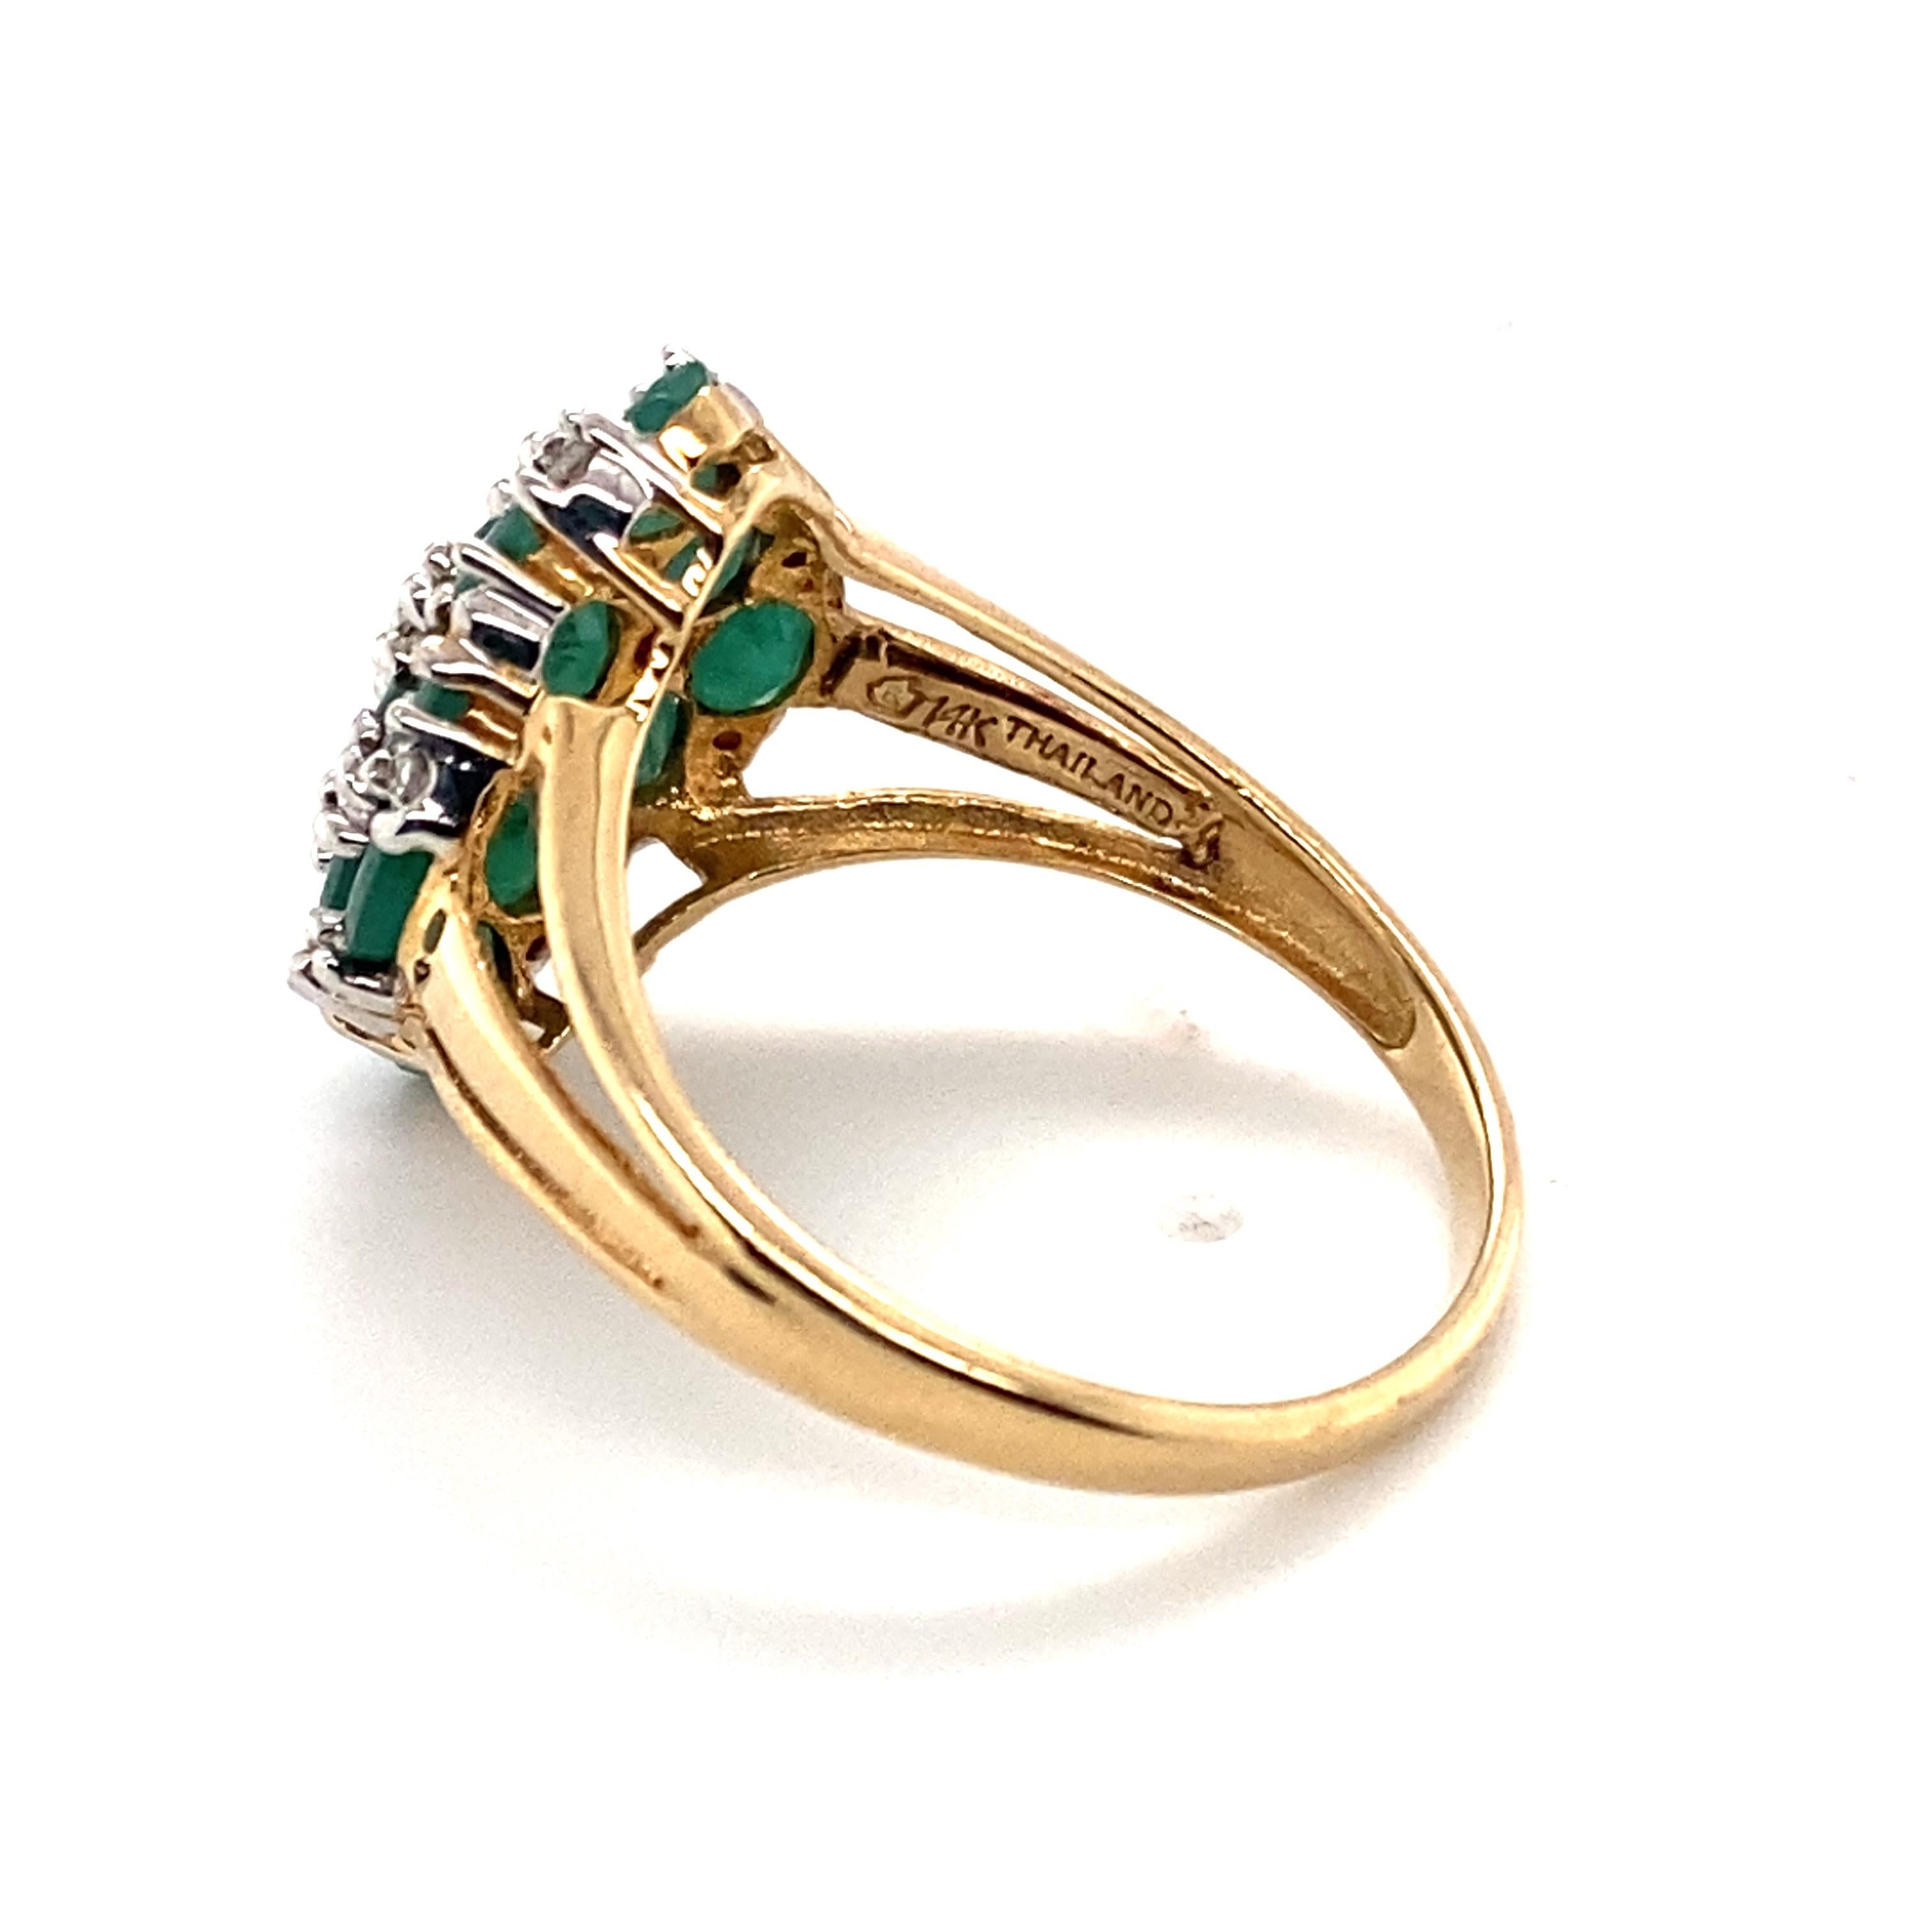 Oval Cut 1.92 Carat Emerald and Diamond Ring in 14 Karat Yellow Gold For Sale